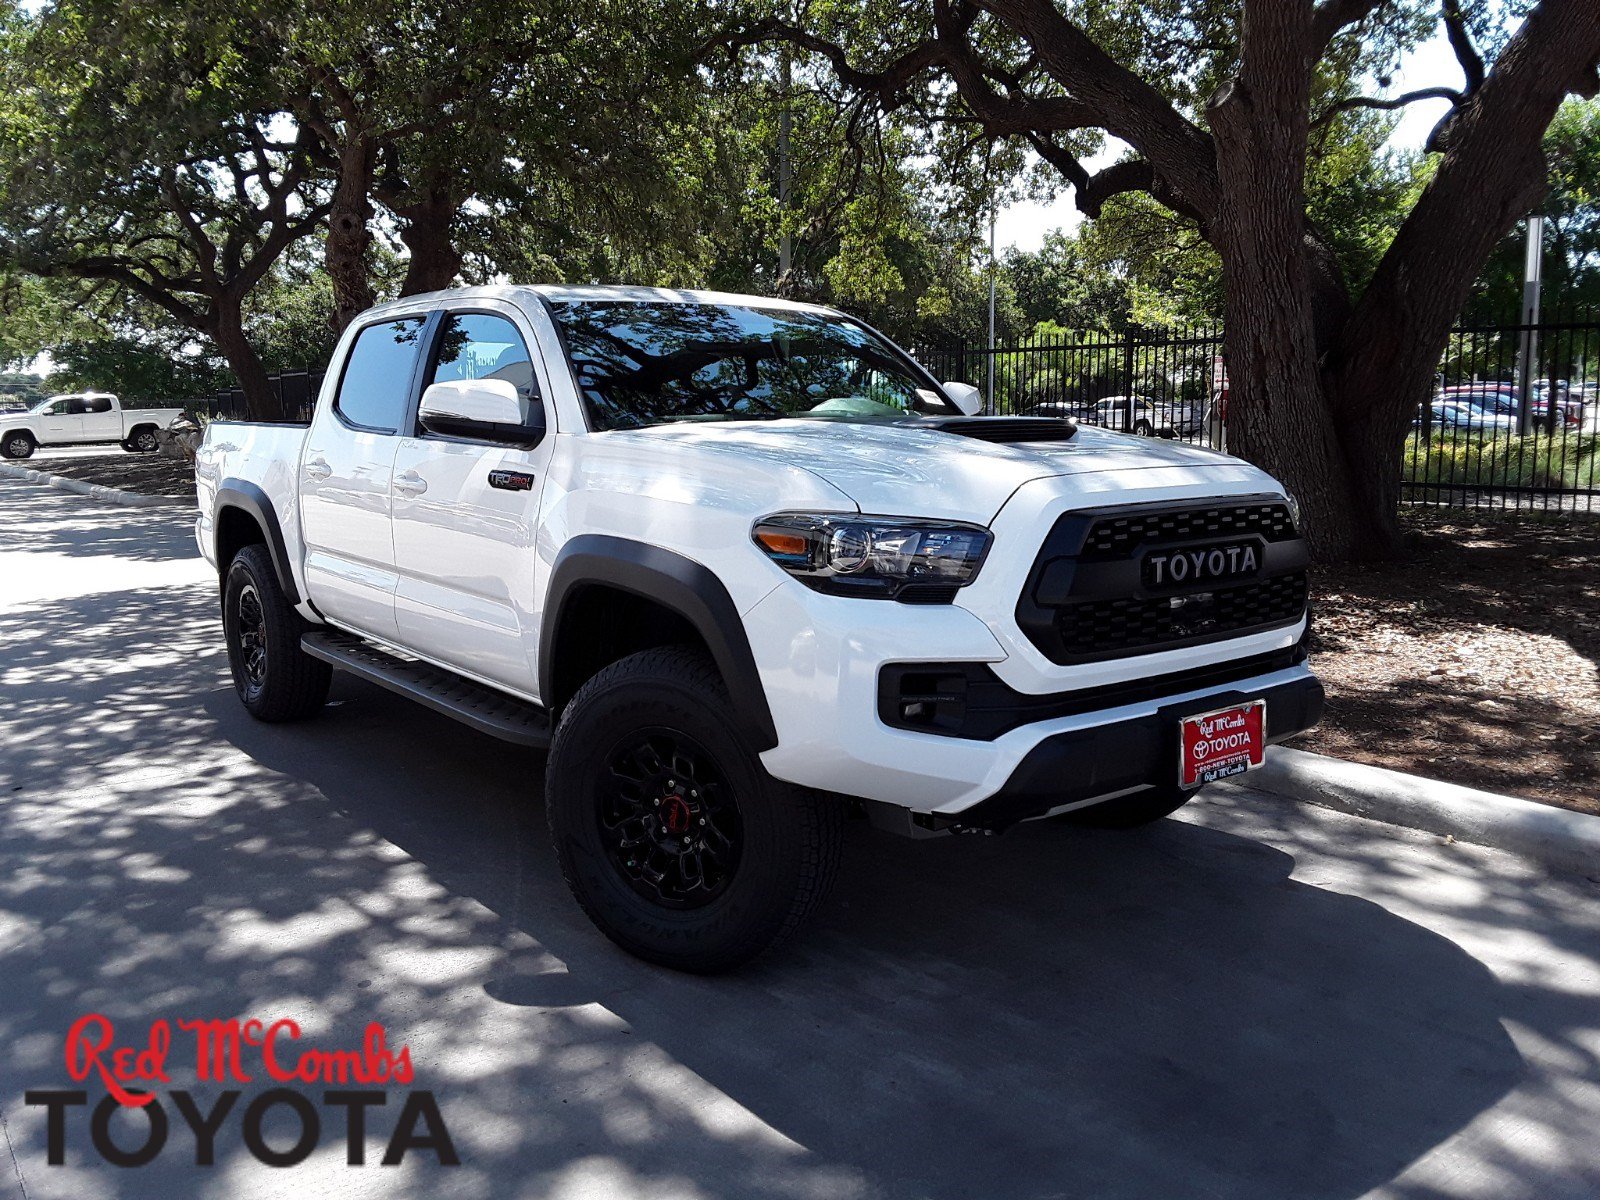 New 2019 Toyota Tacoma Trd Pro With Navigation 4wd